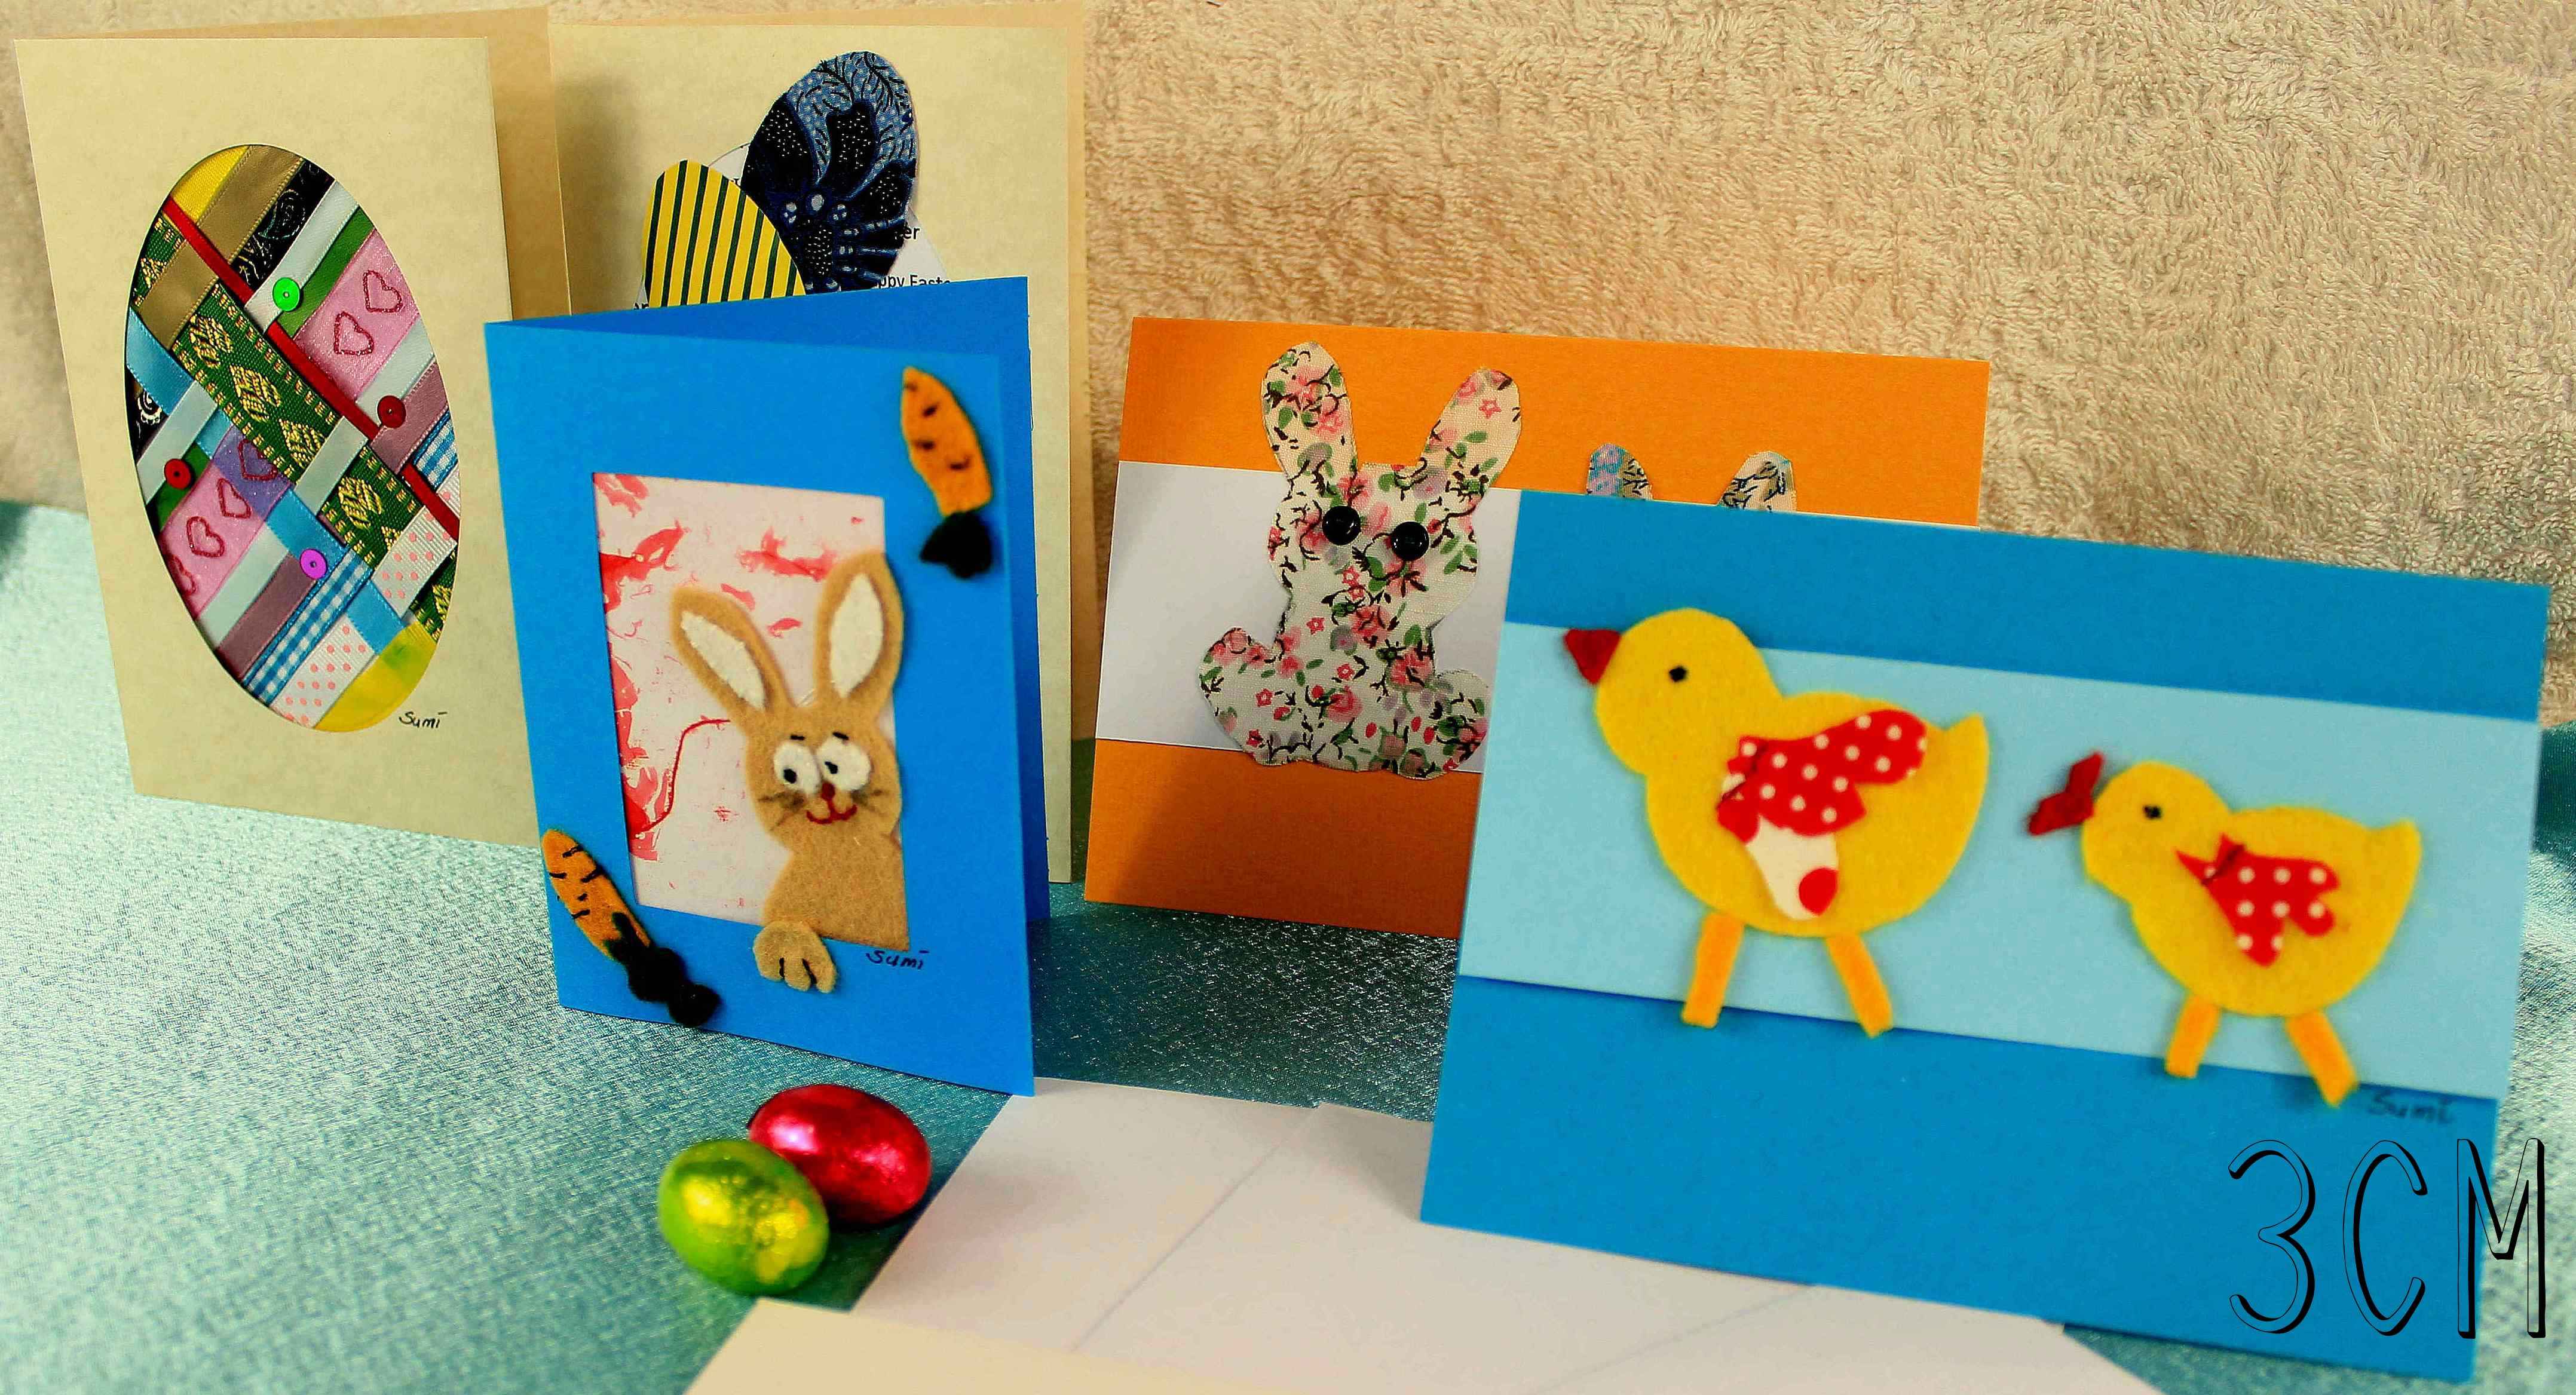 Cute Handmade Easter Card pack with Bunnies, Chicks, and Easter Eggs designed in felt, cross-stitch and paper